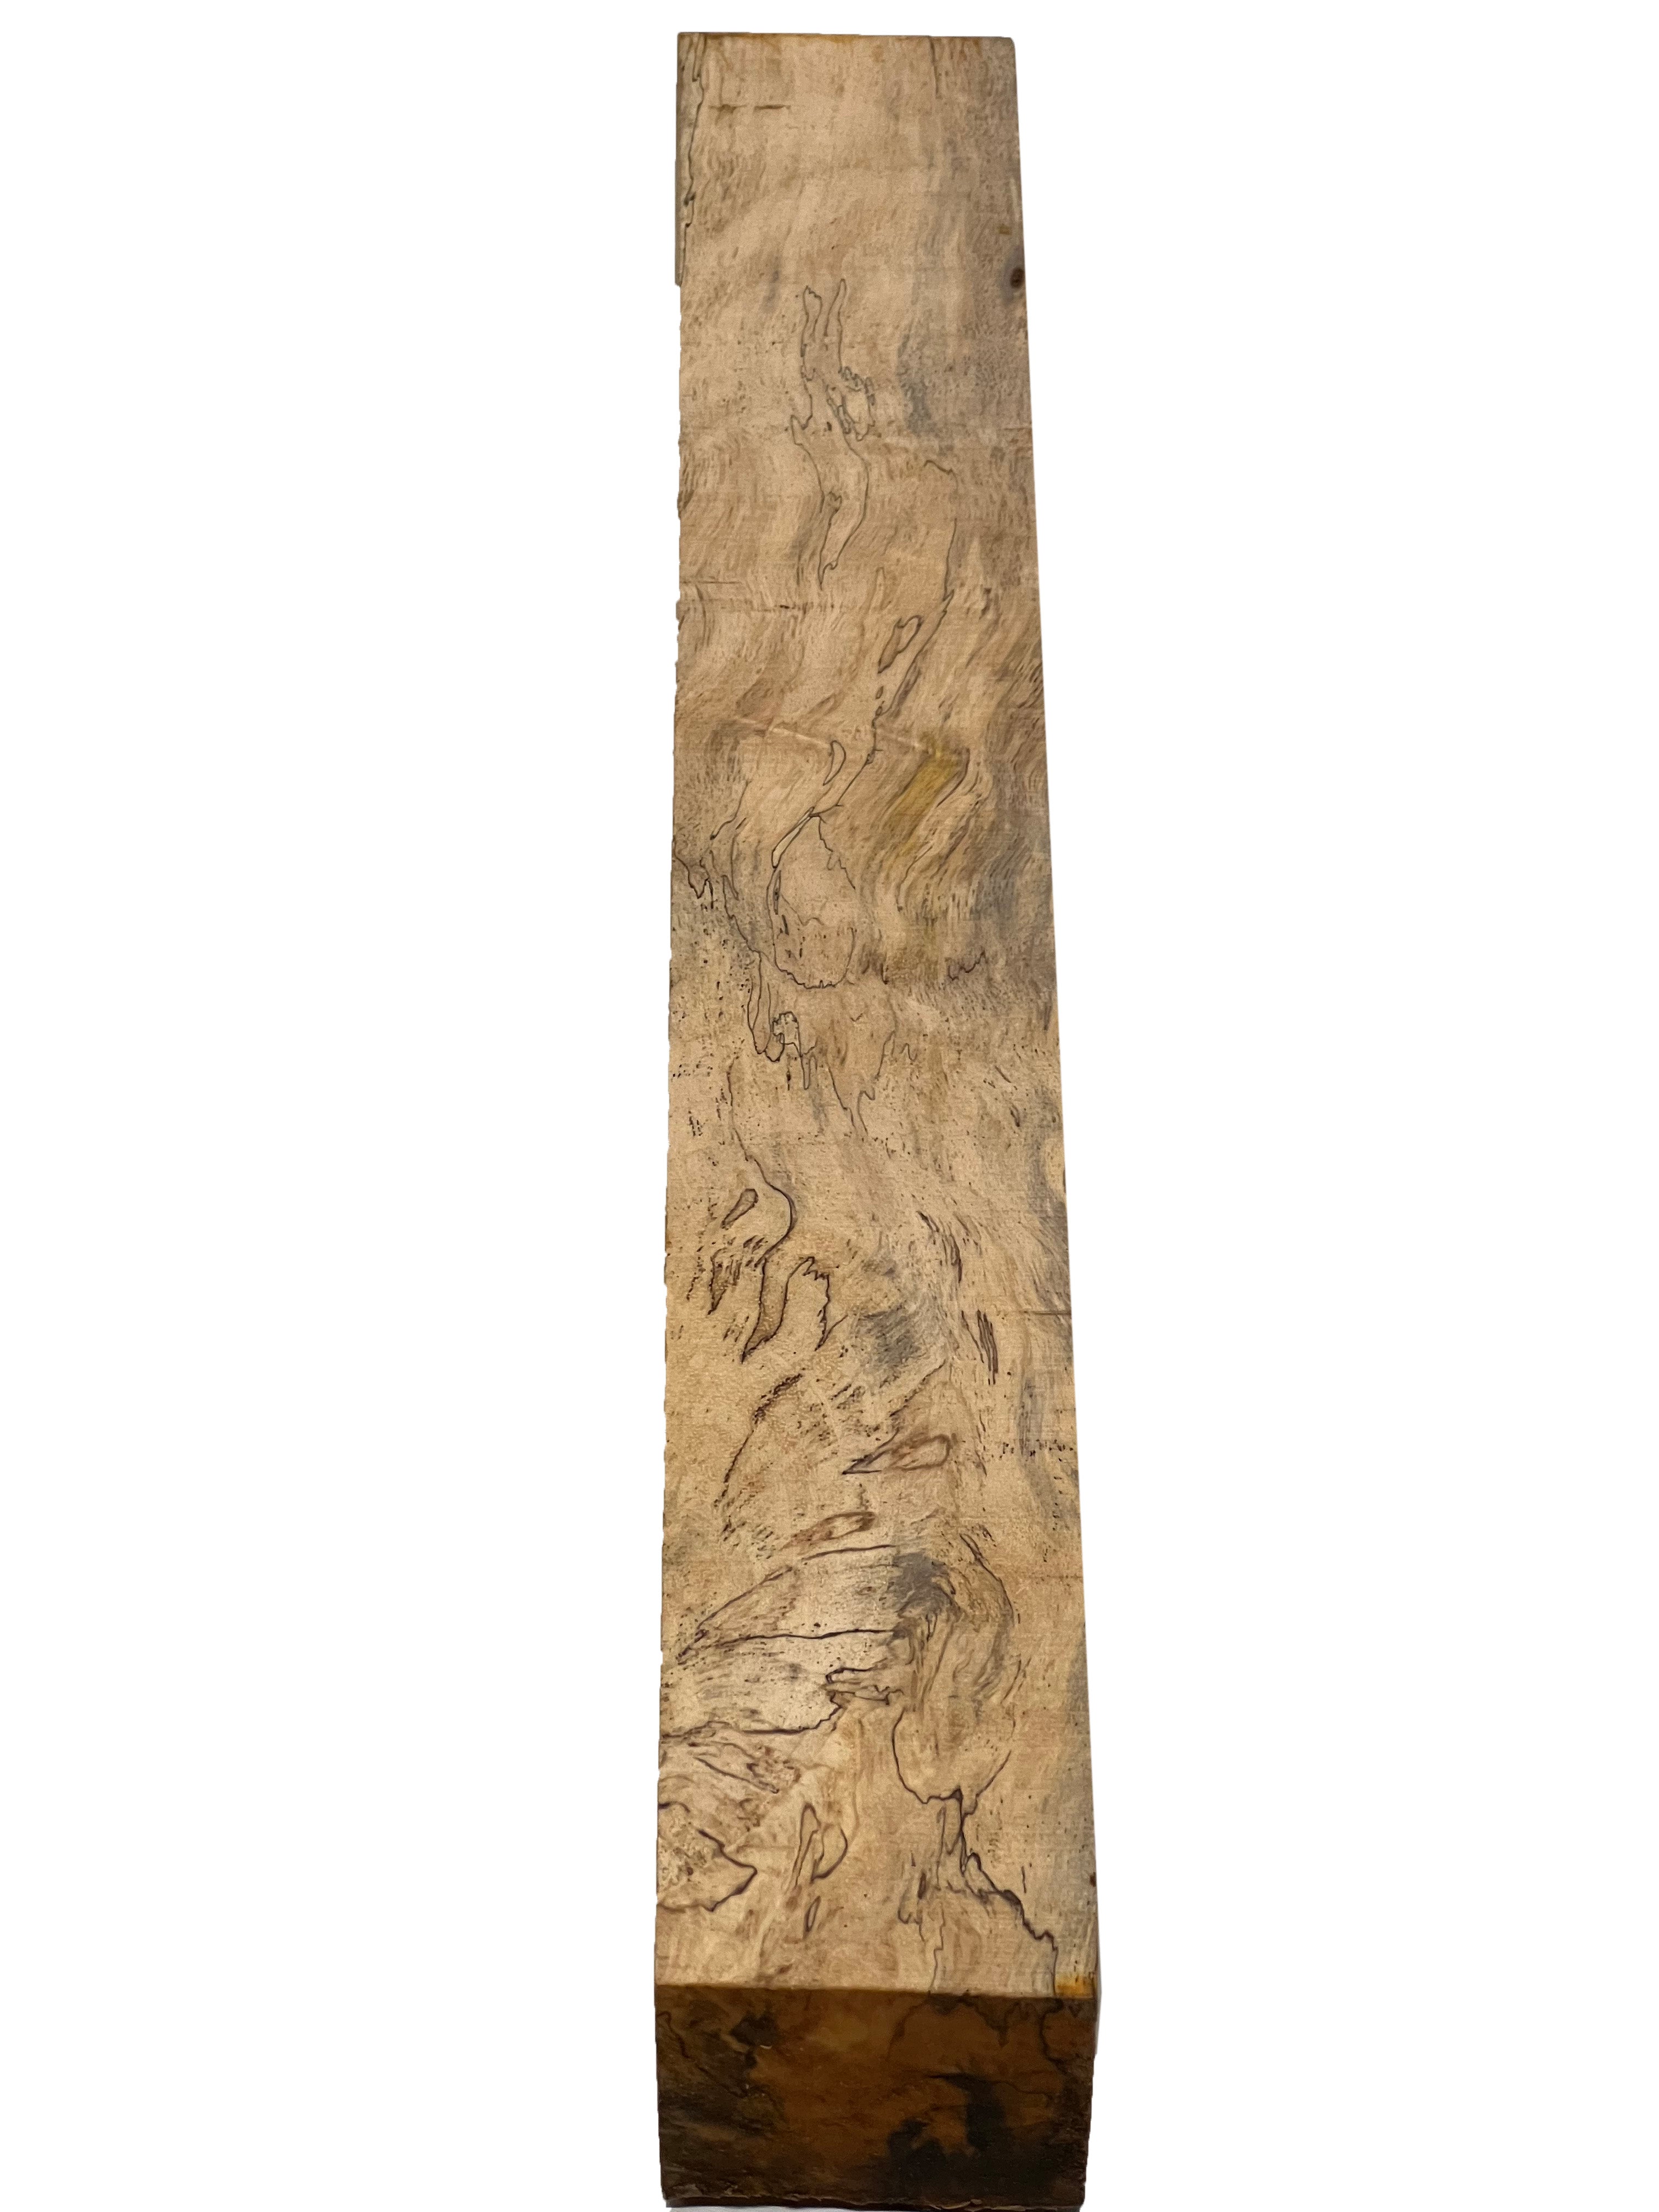 Combo Pack 10,Yellow Tamarind Turning Blanks 24” x 2” x 2” - Exotic Wood Zone - Buy online Across USA 